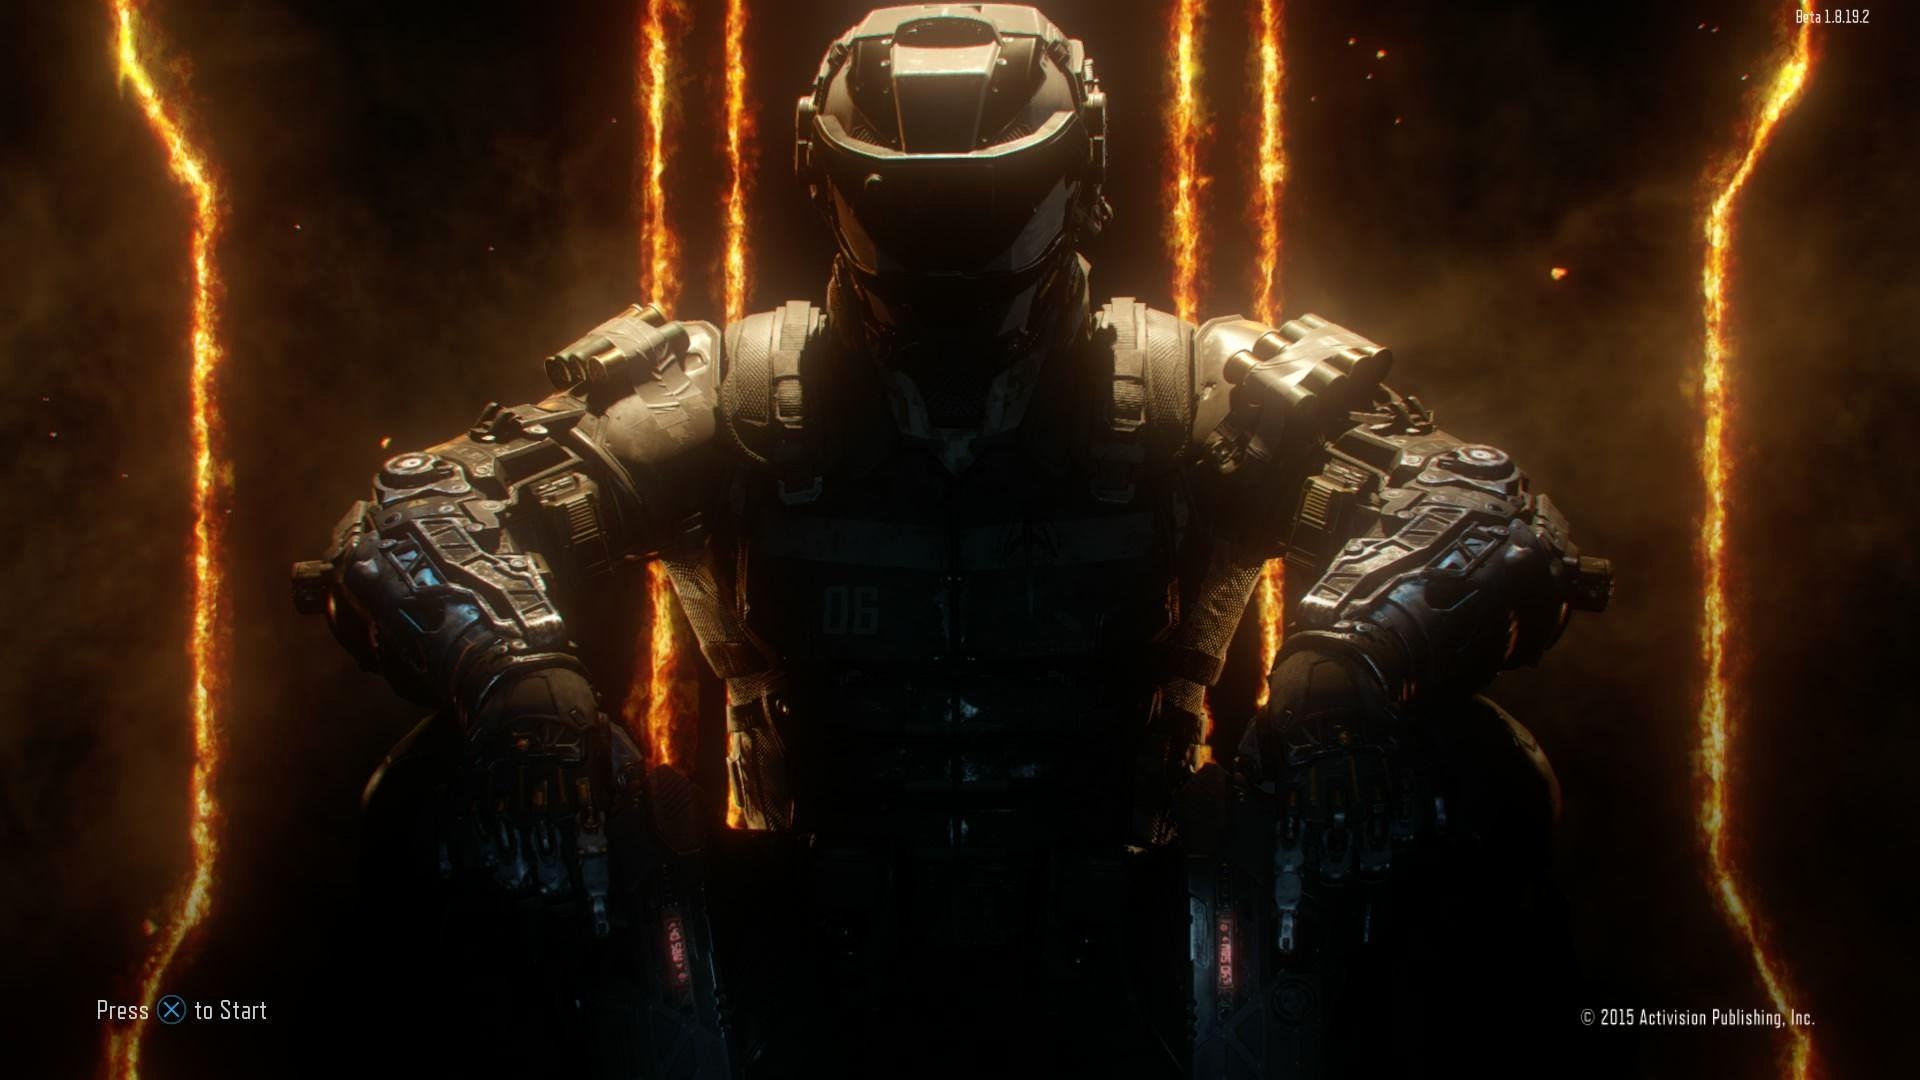 bo3 wallpaper hd,action adventure game,pc game,movie,action figure,darkness